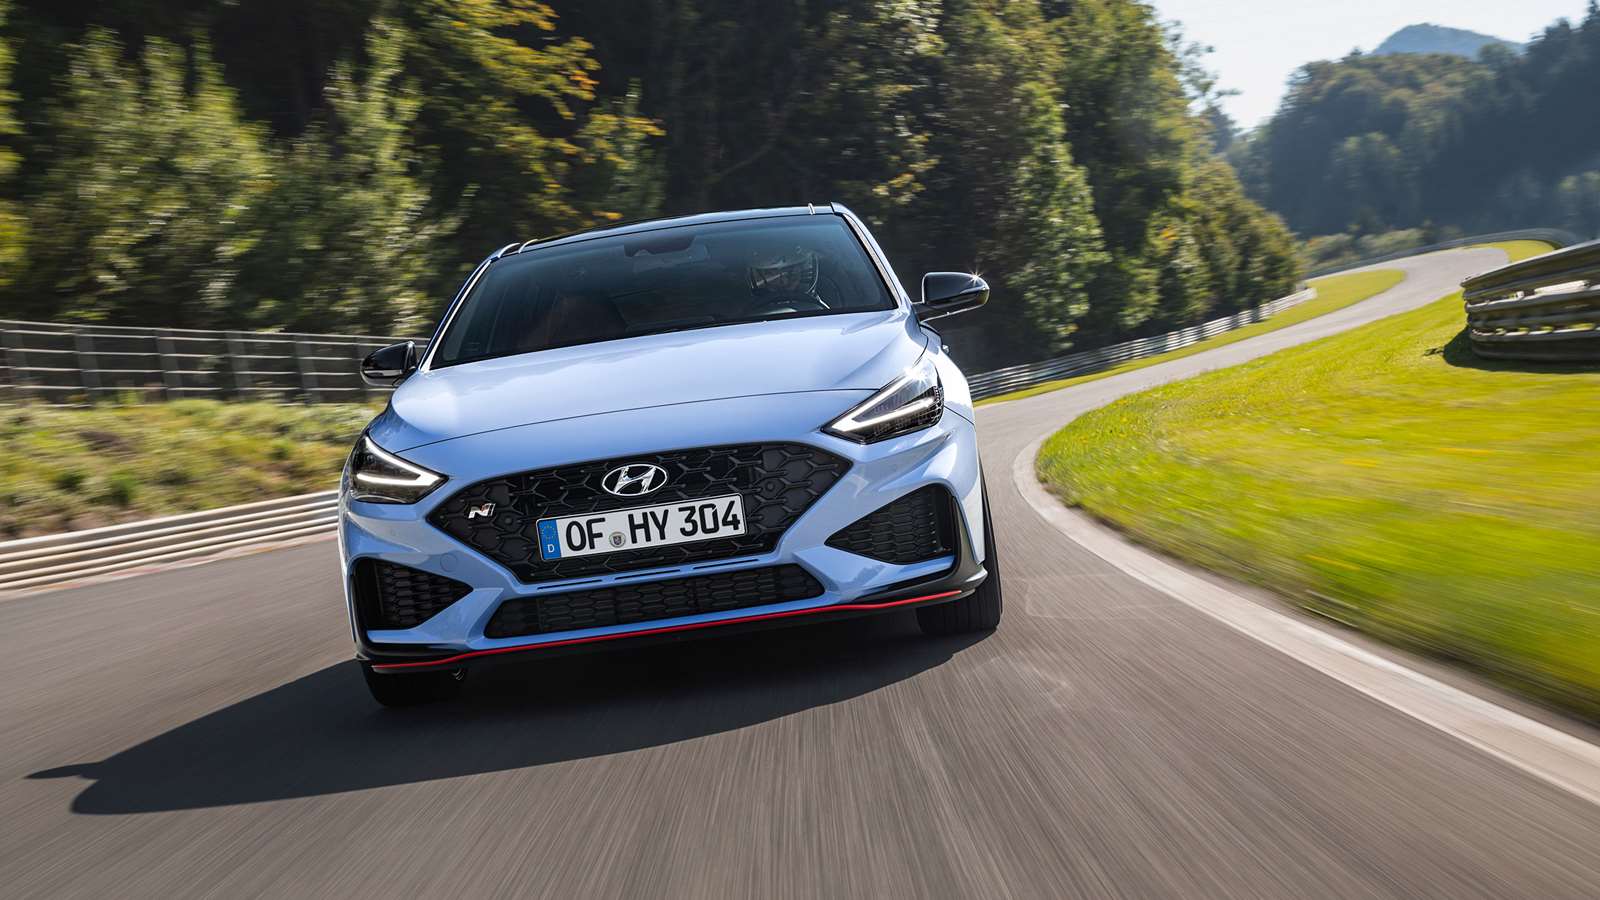 The new Hyundai i30 N looks sharper and shifts quicker